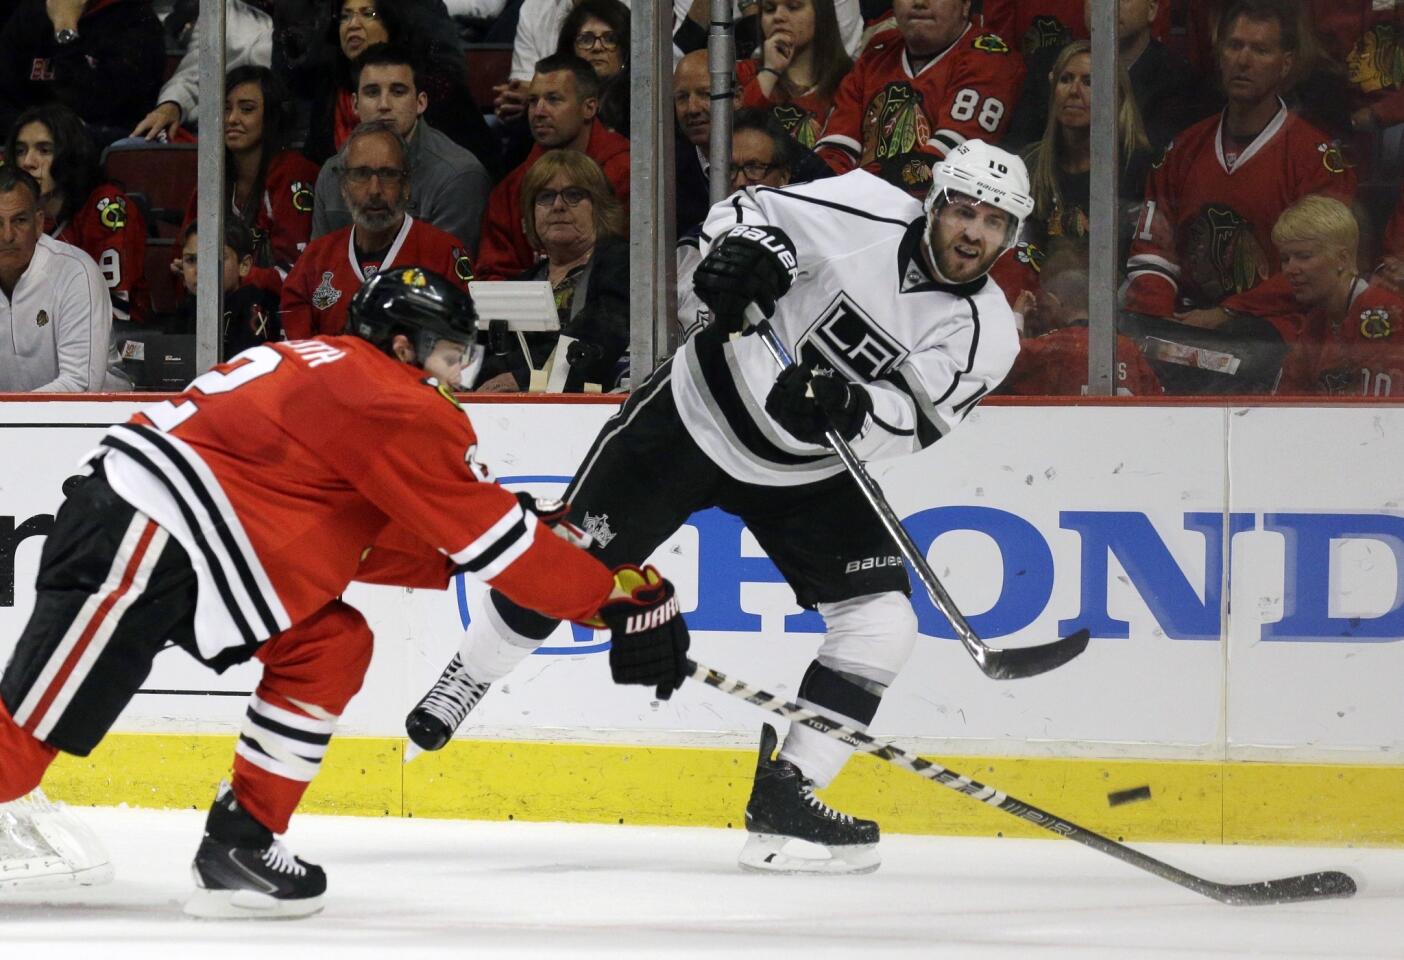 Mike Richards, Duncan Keith